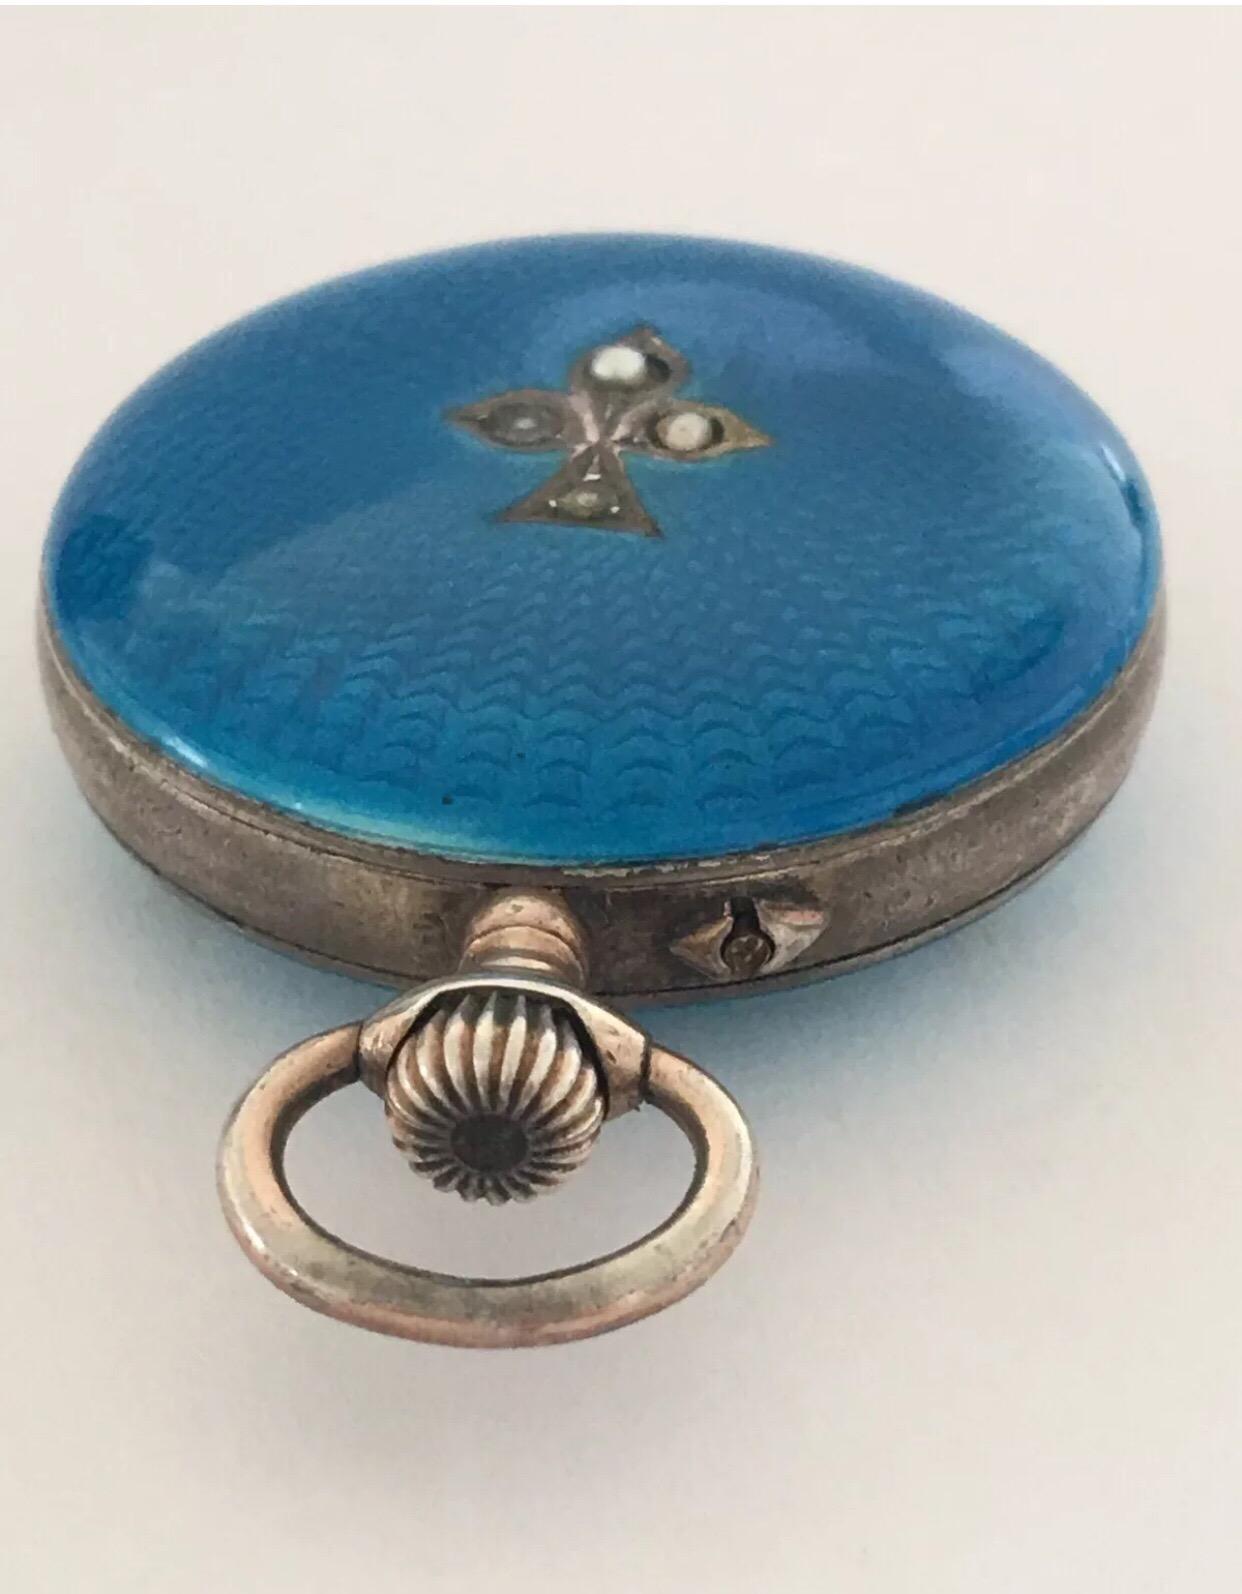 Women's or Men's Antique Turquoise or Blue Enamel Silver Fob Watch